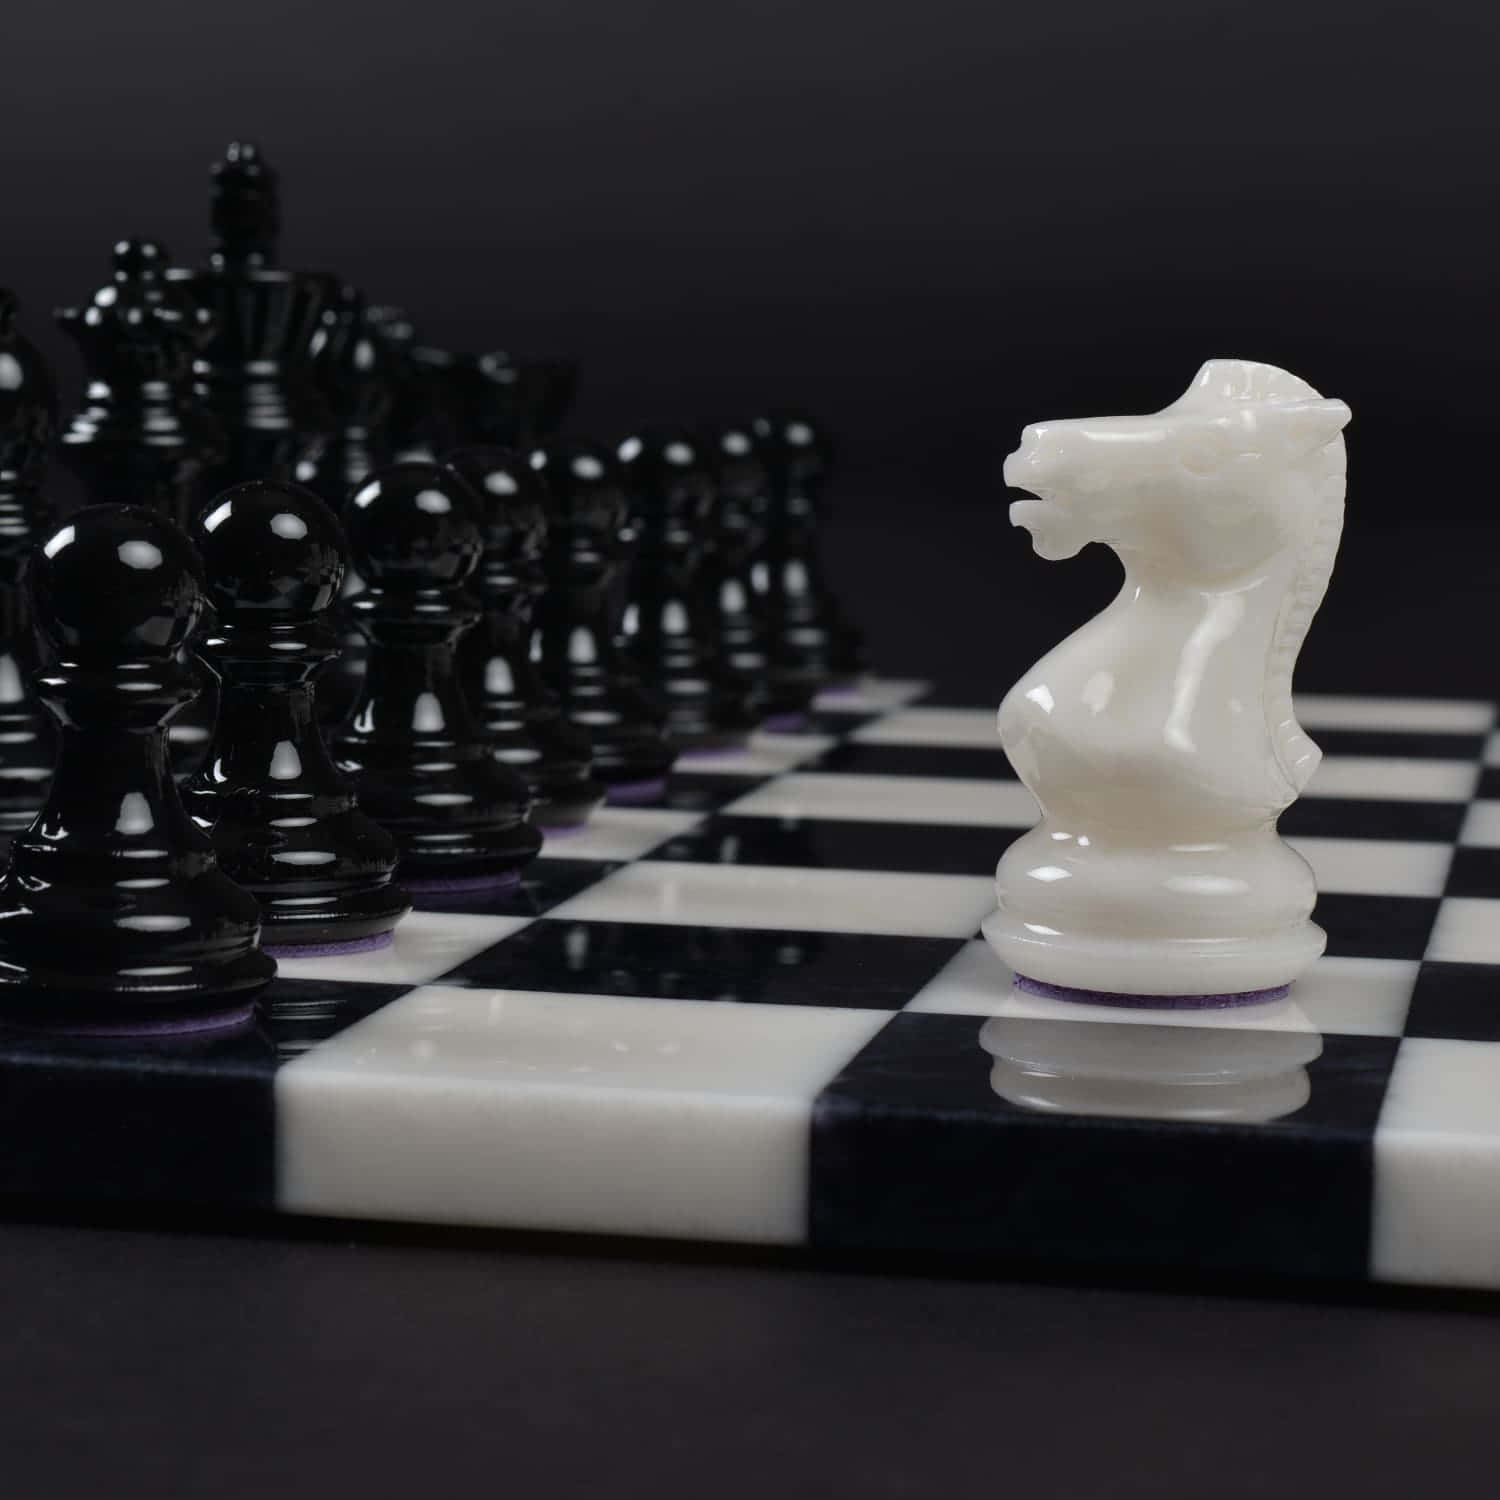 A strategic game of black and white chess pieces on a beautiful chessboard Wallpaper